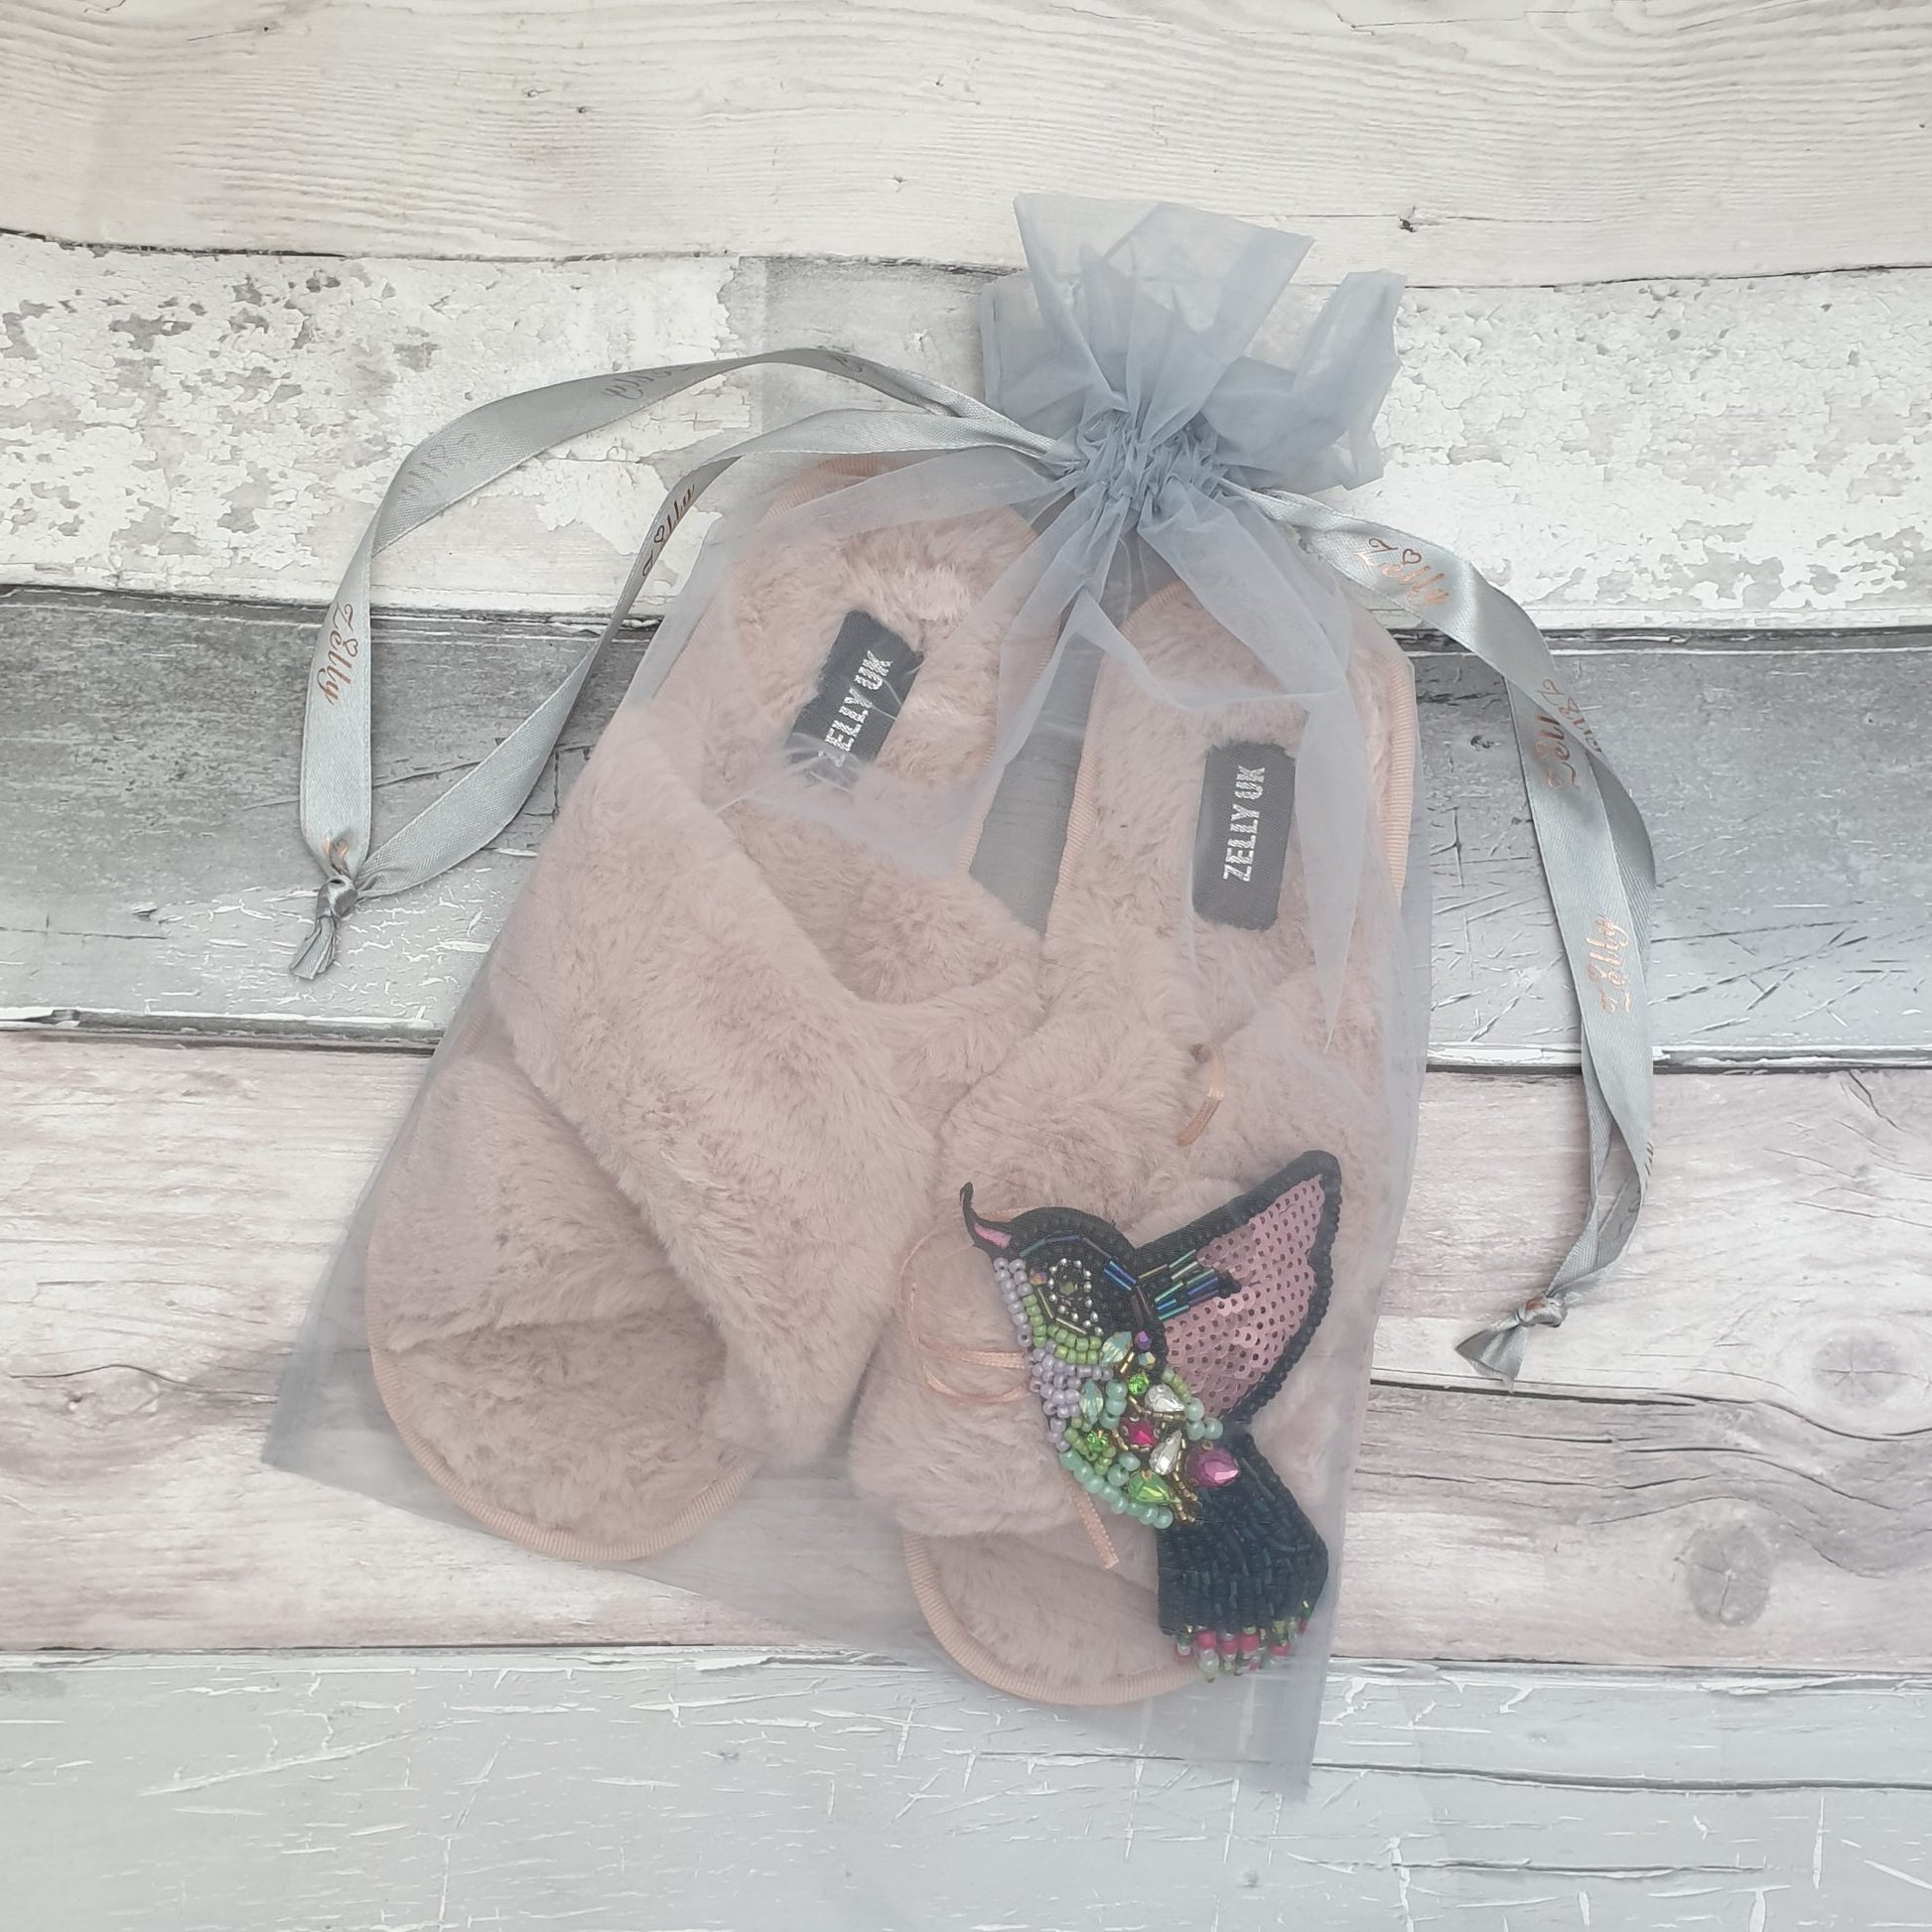 Fluffy pink slippers with a Pink and Green Hummingbird Brooch presented in a grey drawstring organza bag.